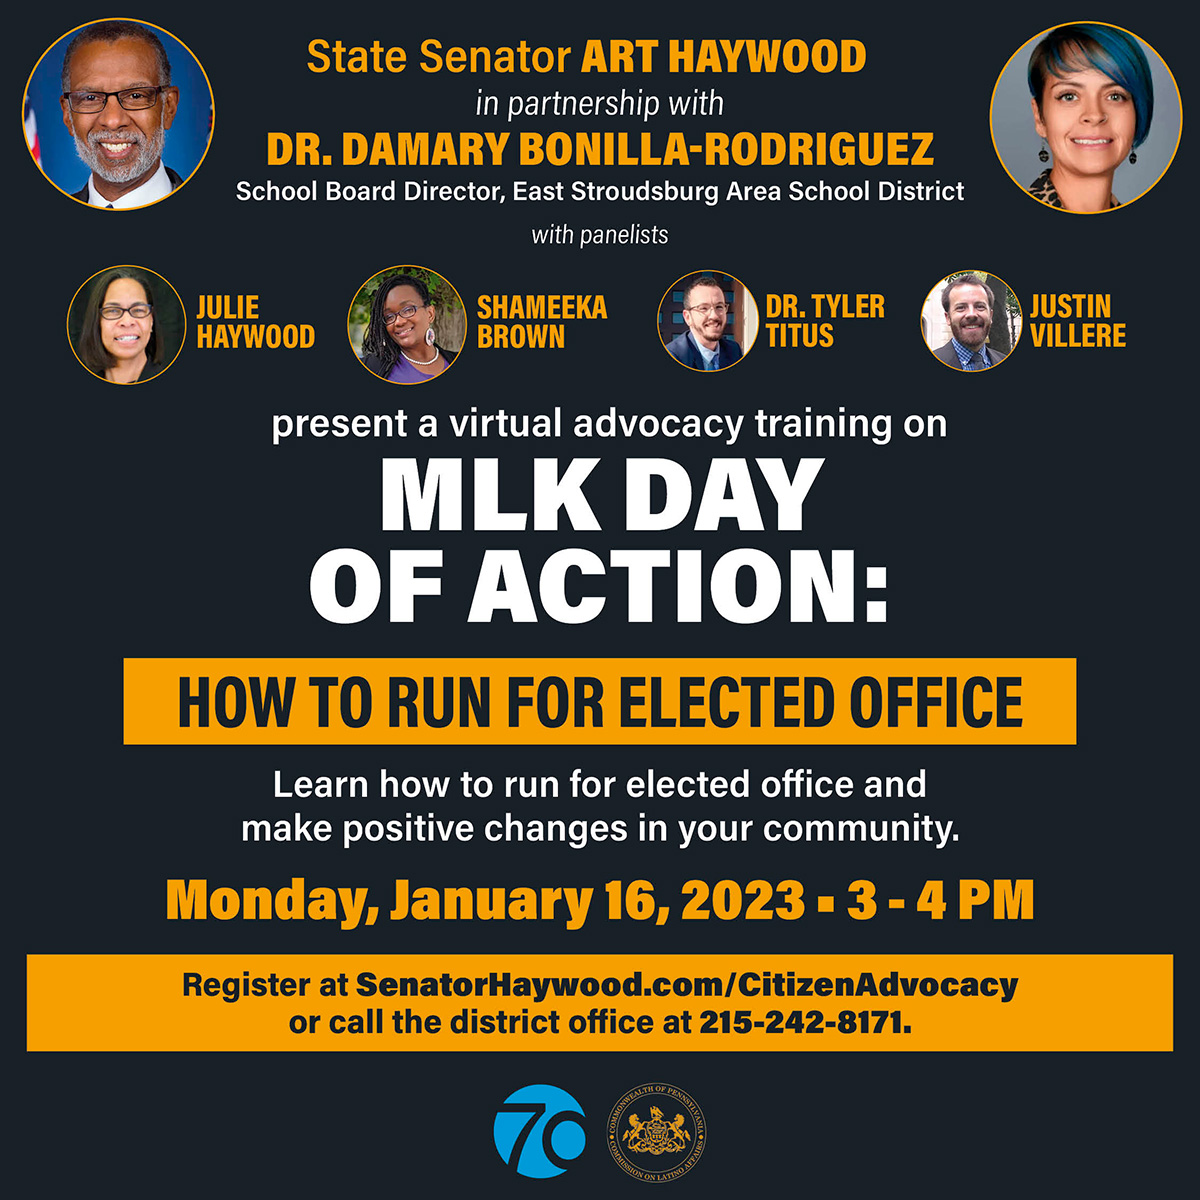 MLK Day of Action: How to Run for Elected Office - January 16, 2022